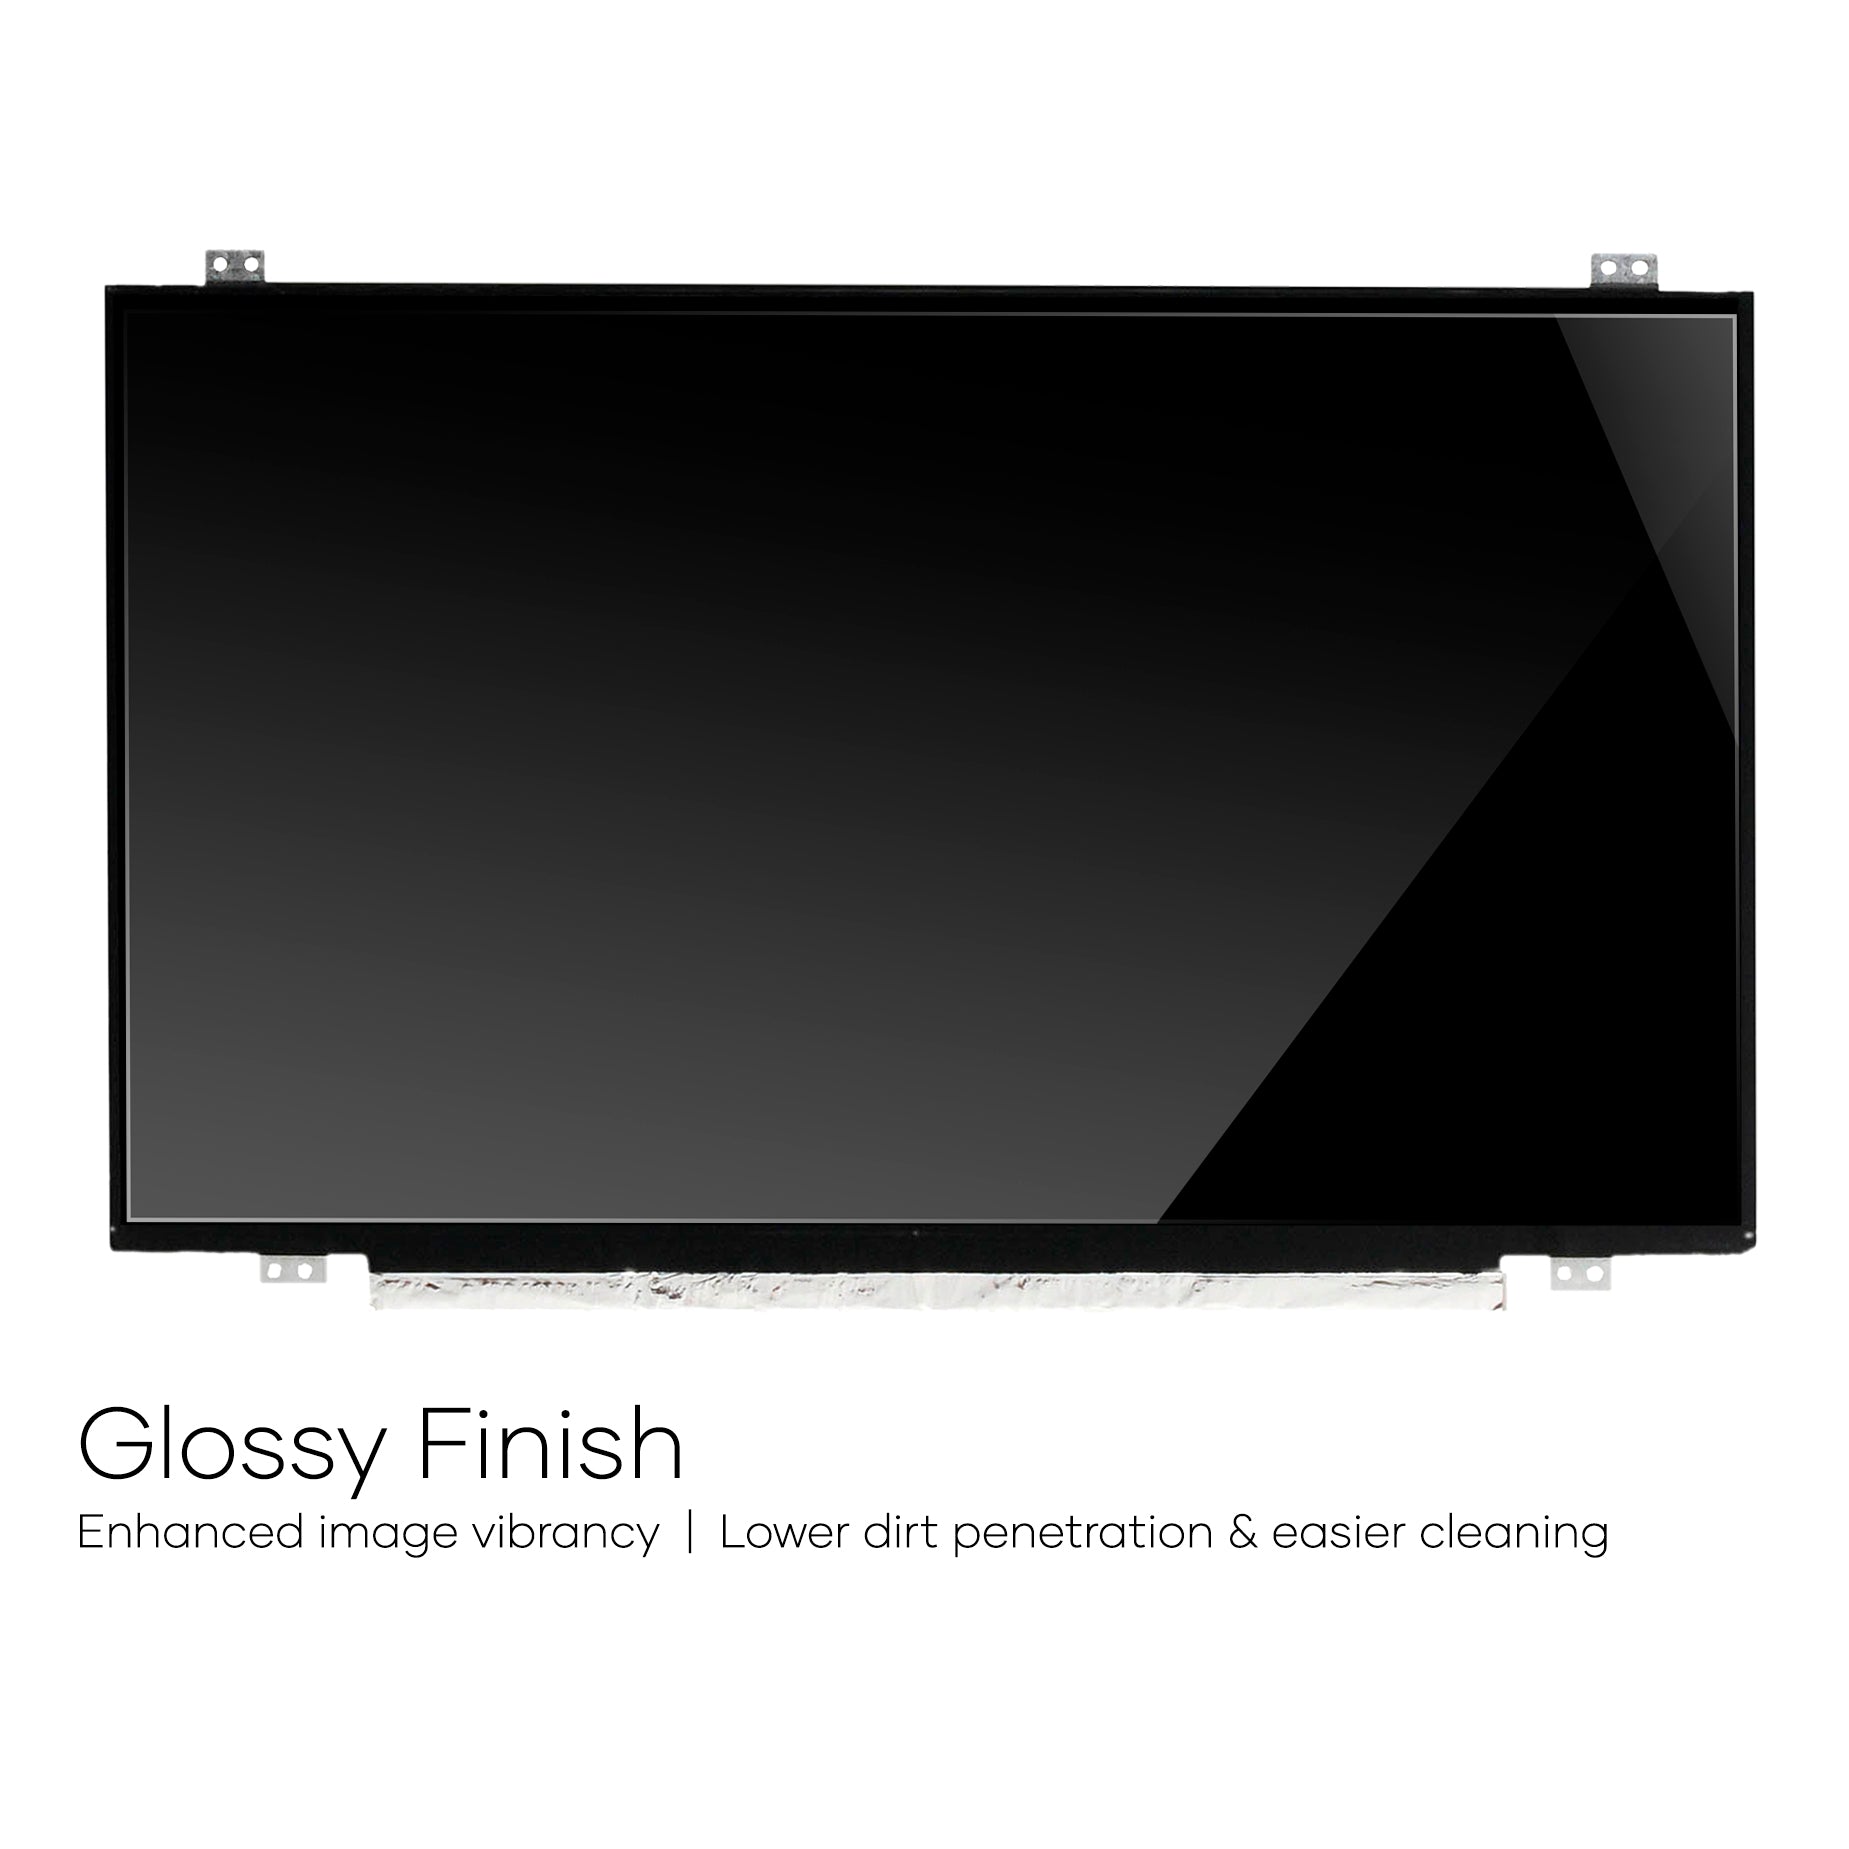 Screen Replacement for LP140WHU(TP)(A1) HD 1366x768 Glossy LCD LED Display